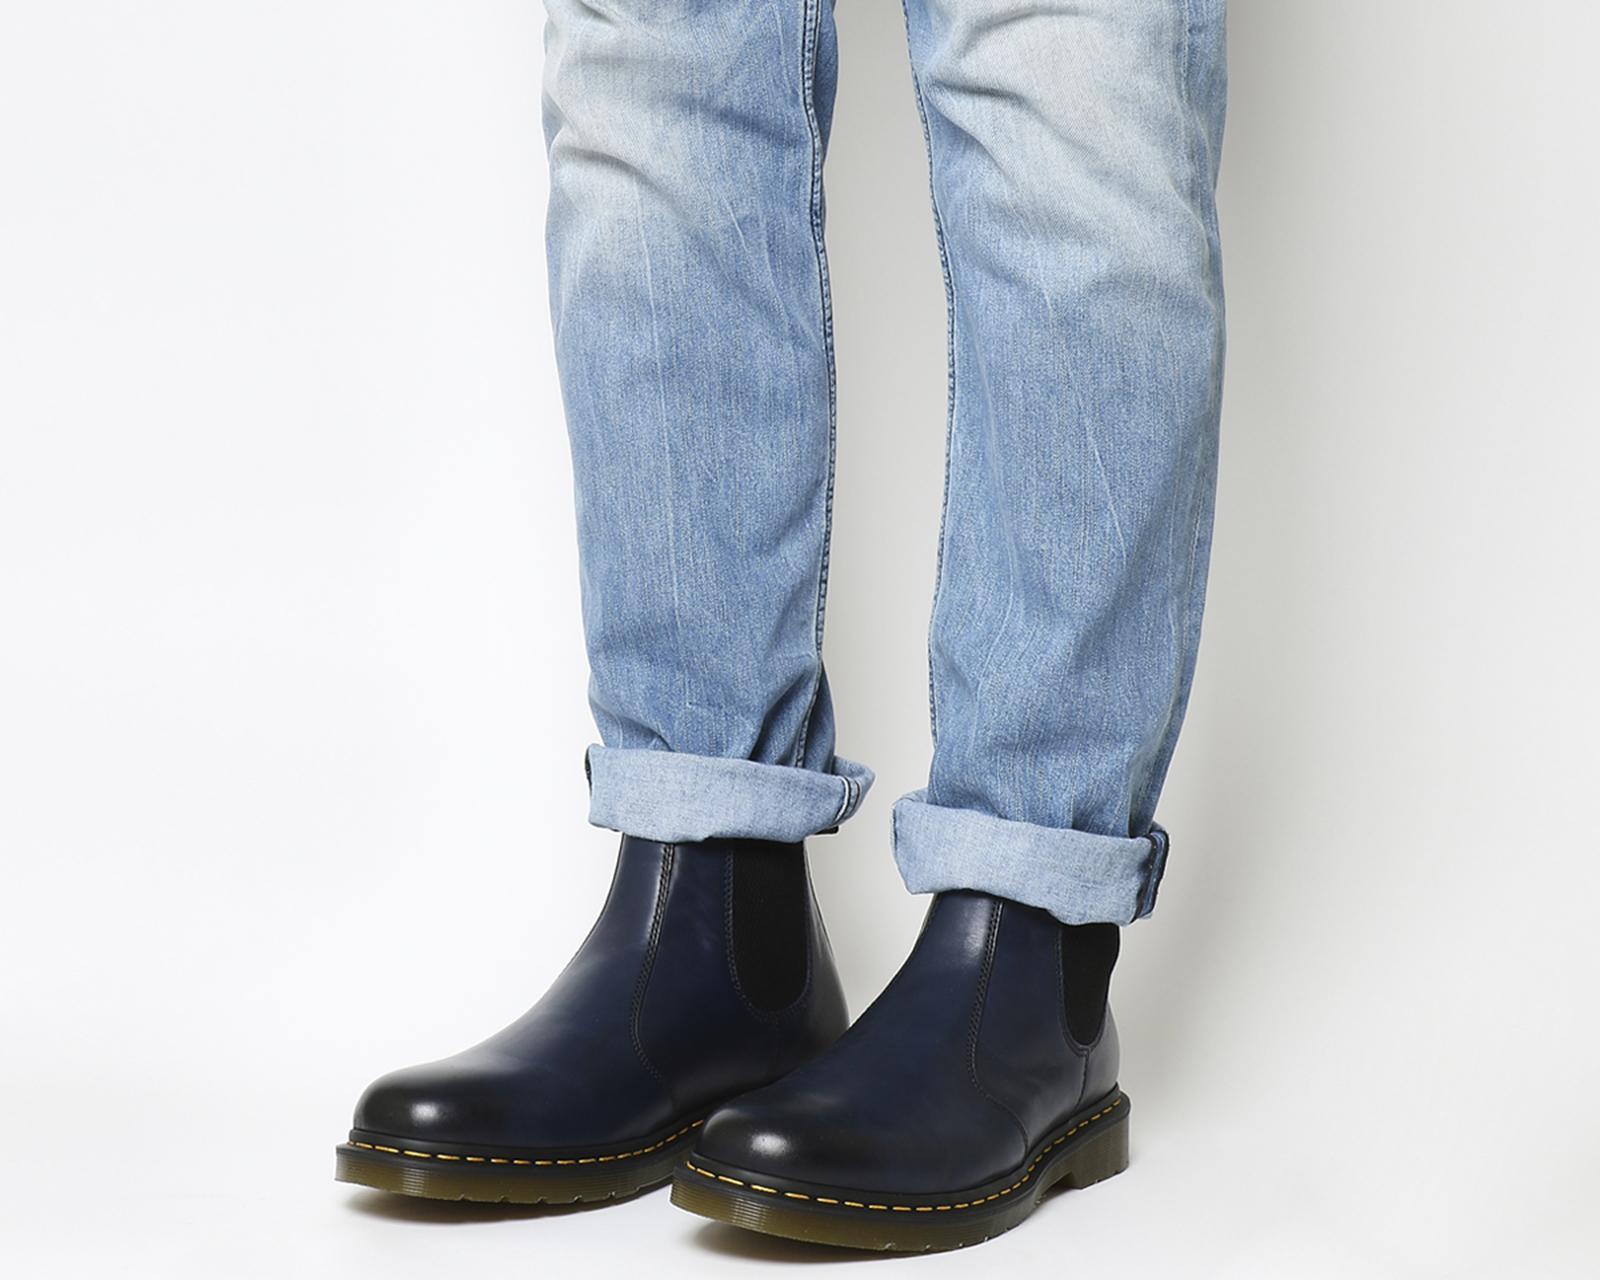 Dr. Martens Leather 2976 Chelsea Boots in Navy (Blue) - Lyst